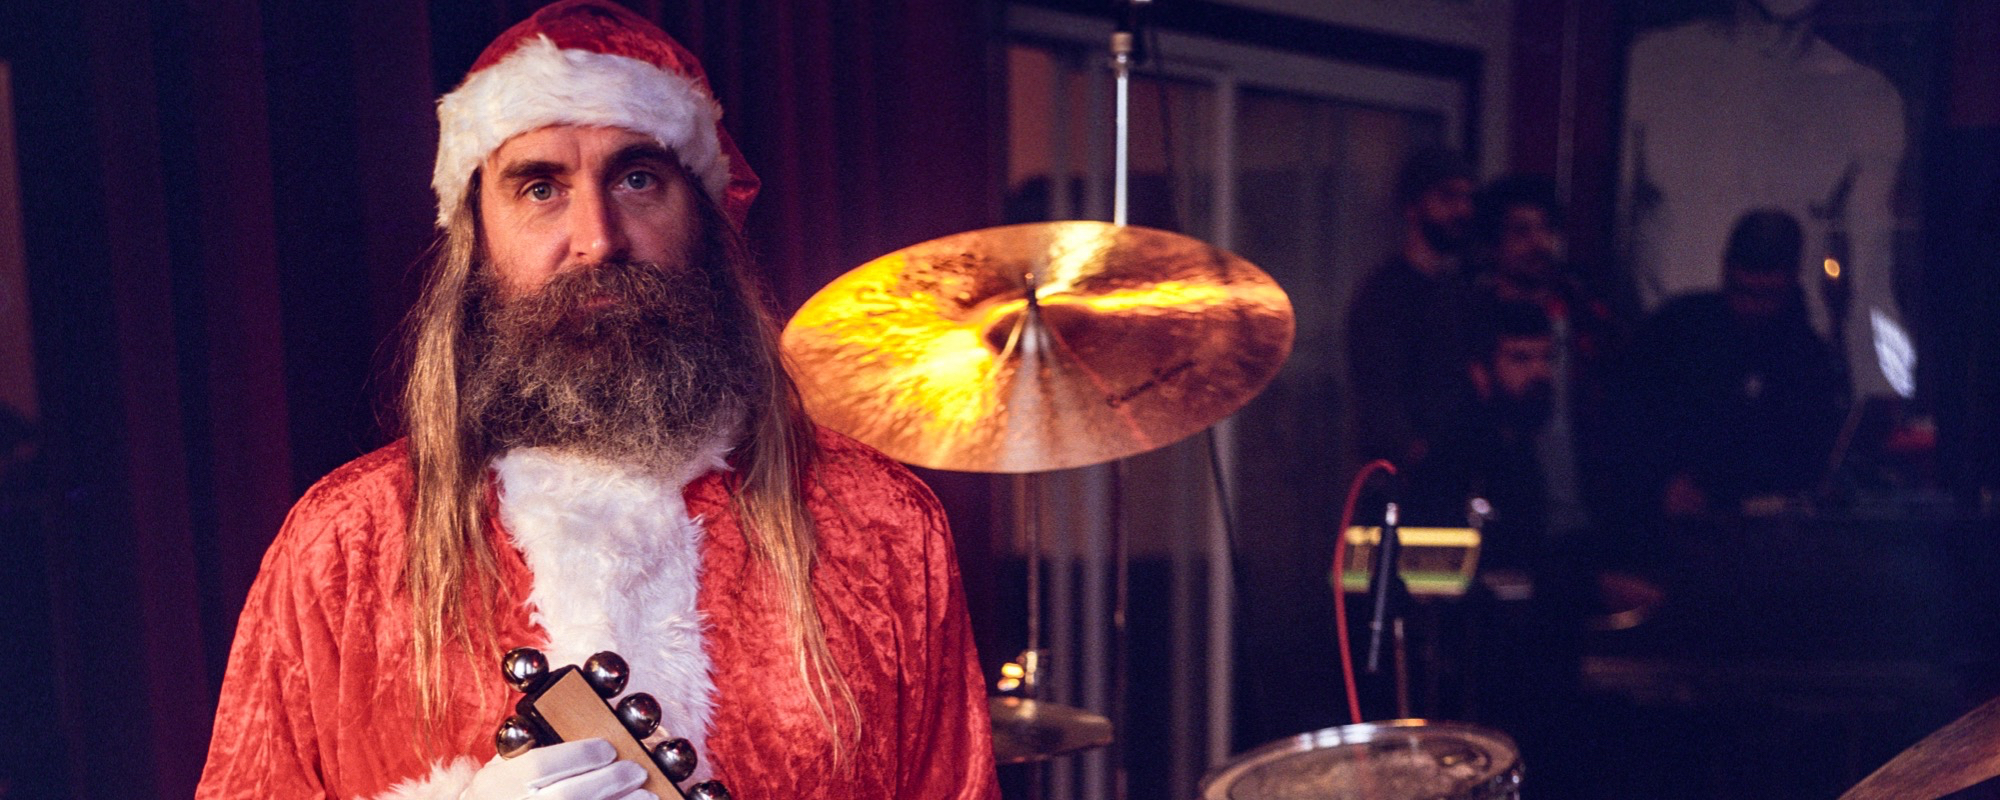 Titus Andronicus Share Billy Joel-Inspired Holiday Song “Drummer Boy”